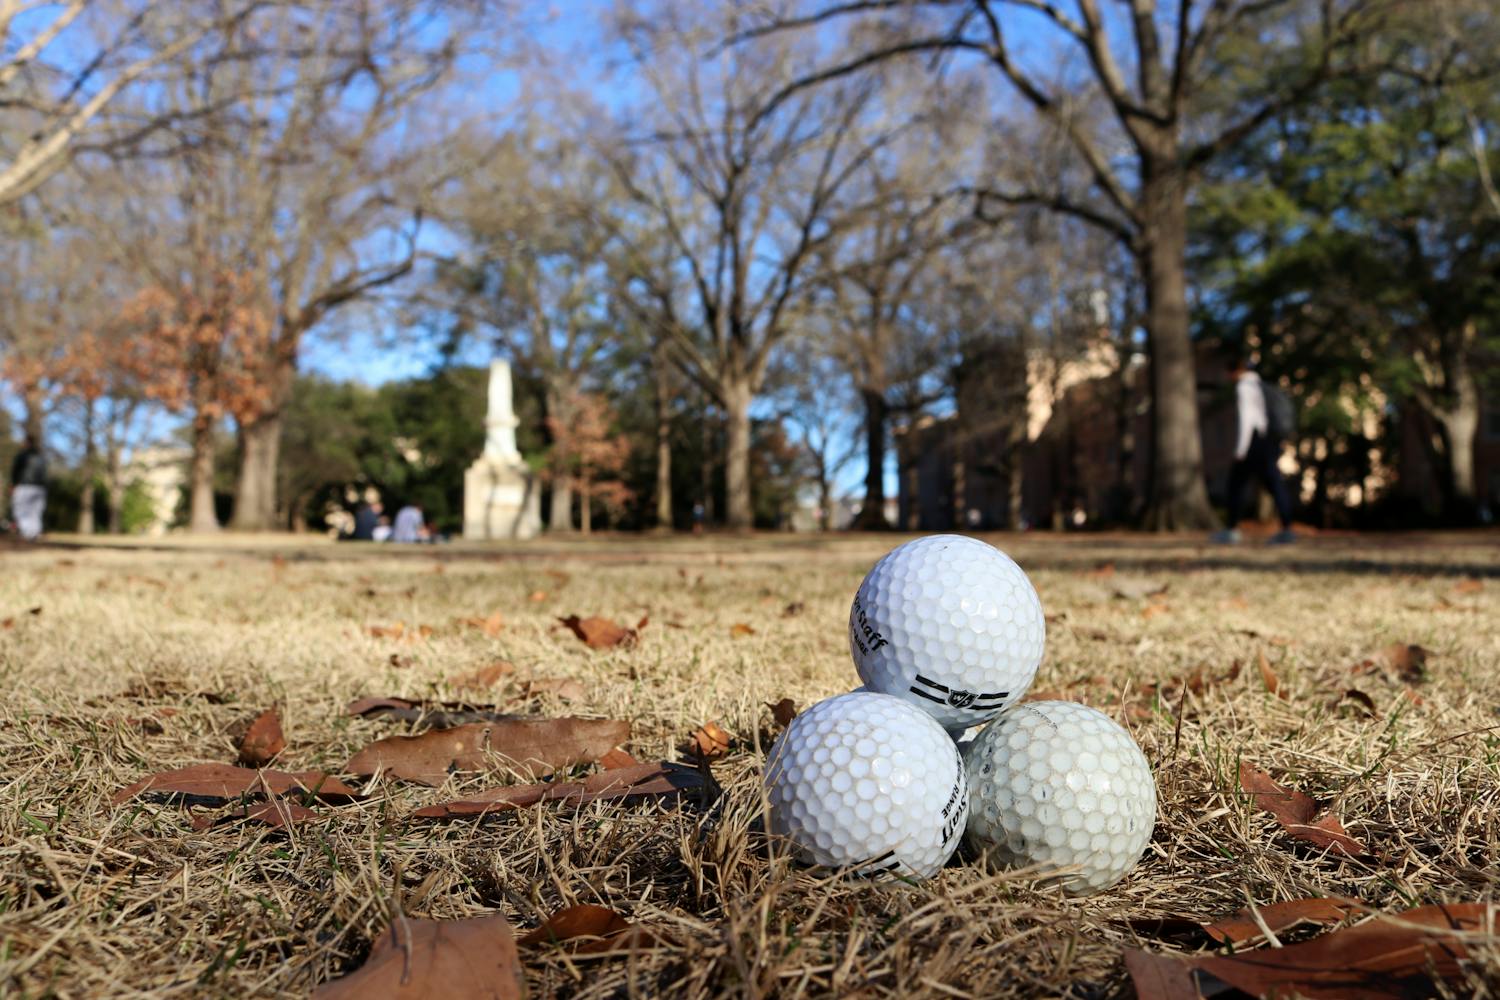 A photo illustration of a stack of golf balls on The Horseshoe at the University of South Carolina on Feb. 13, 2023. The Gamecocks women's golf team started its spring 2023 season at the Nexus Collegiate Invitational in New Providence, Bahamas on Feb.13, 2023.